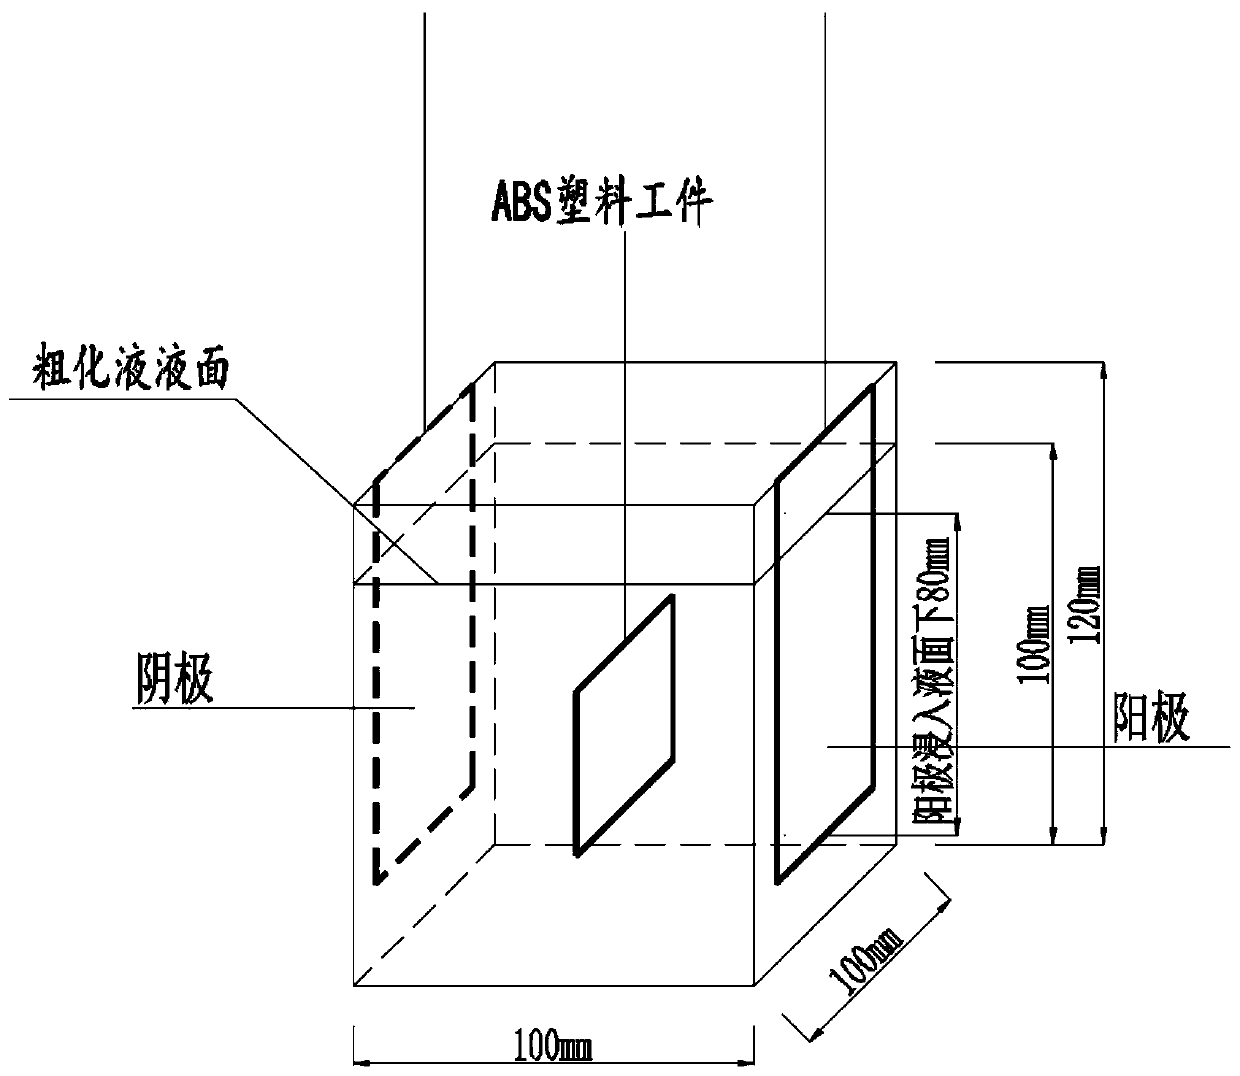 Chromium-free manganese-free coarsening liquid for ABS plastic and application method thereof